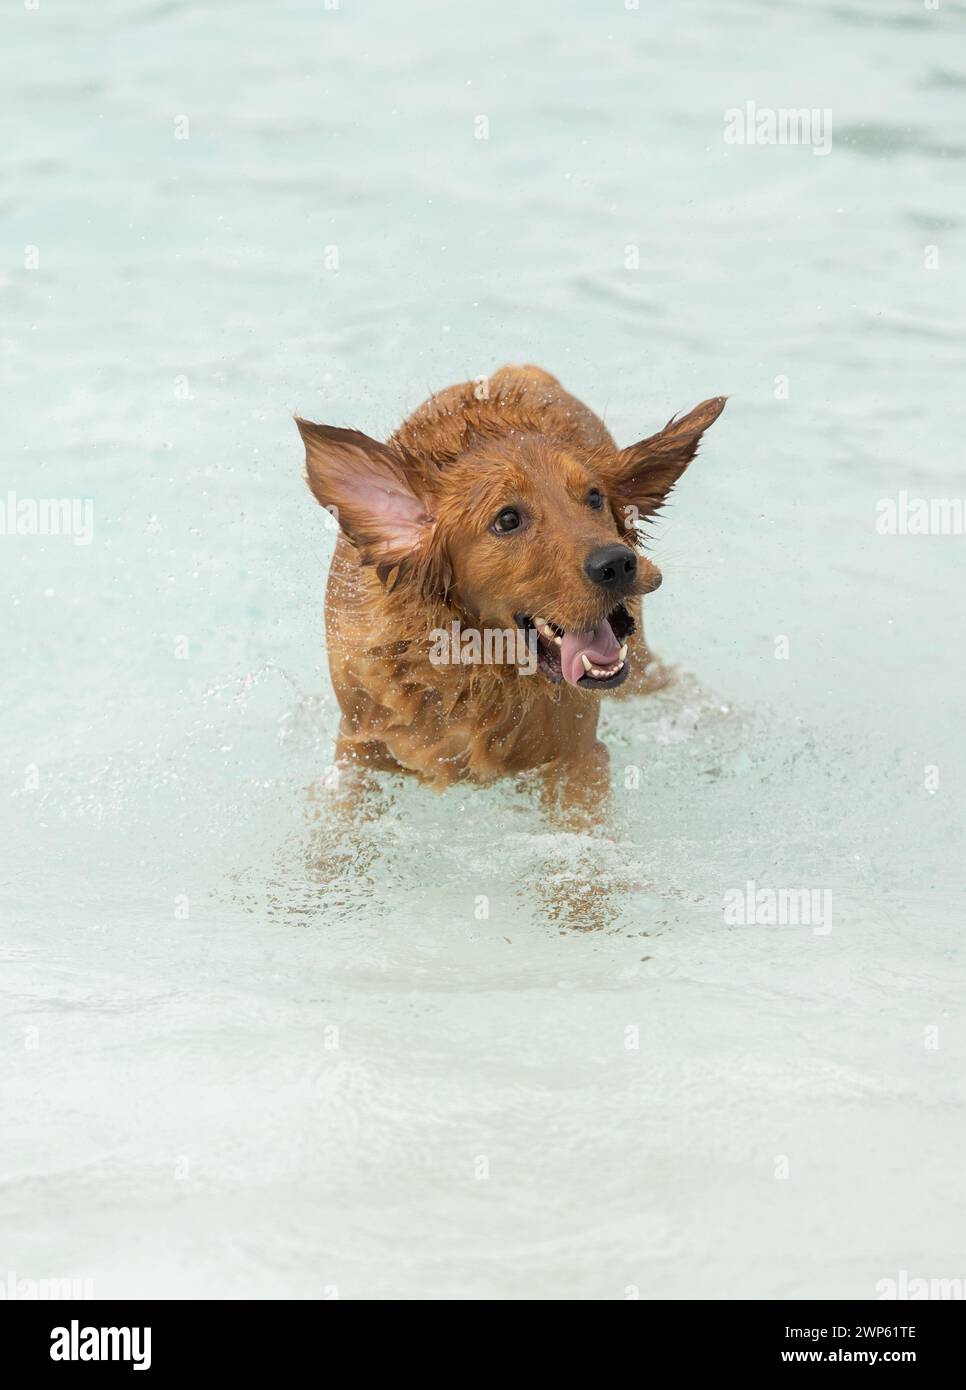 A golden retriever shaking his head and making a funny expression Stock Photo